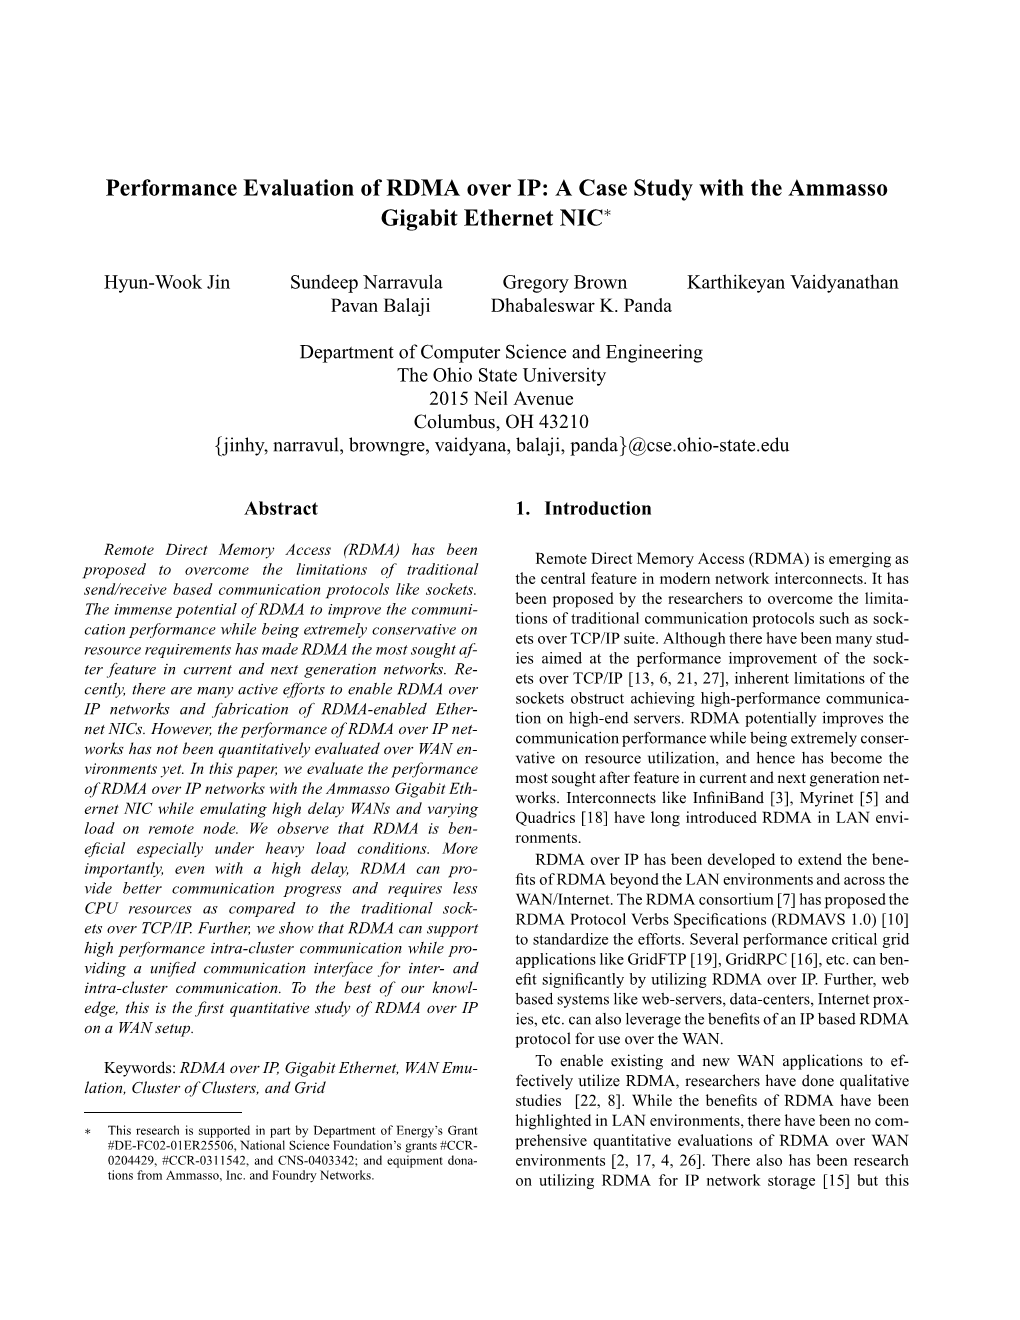 Performance Evaluation of RDMA Over IP: a Case Study with the Ammasso Gigabit Ethernet NIC∗